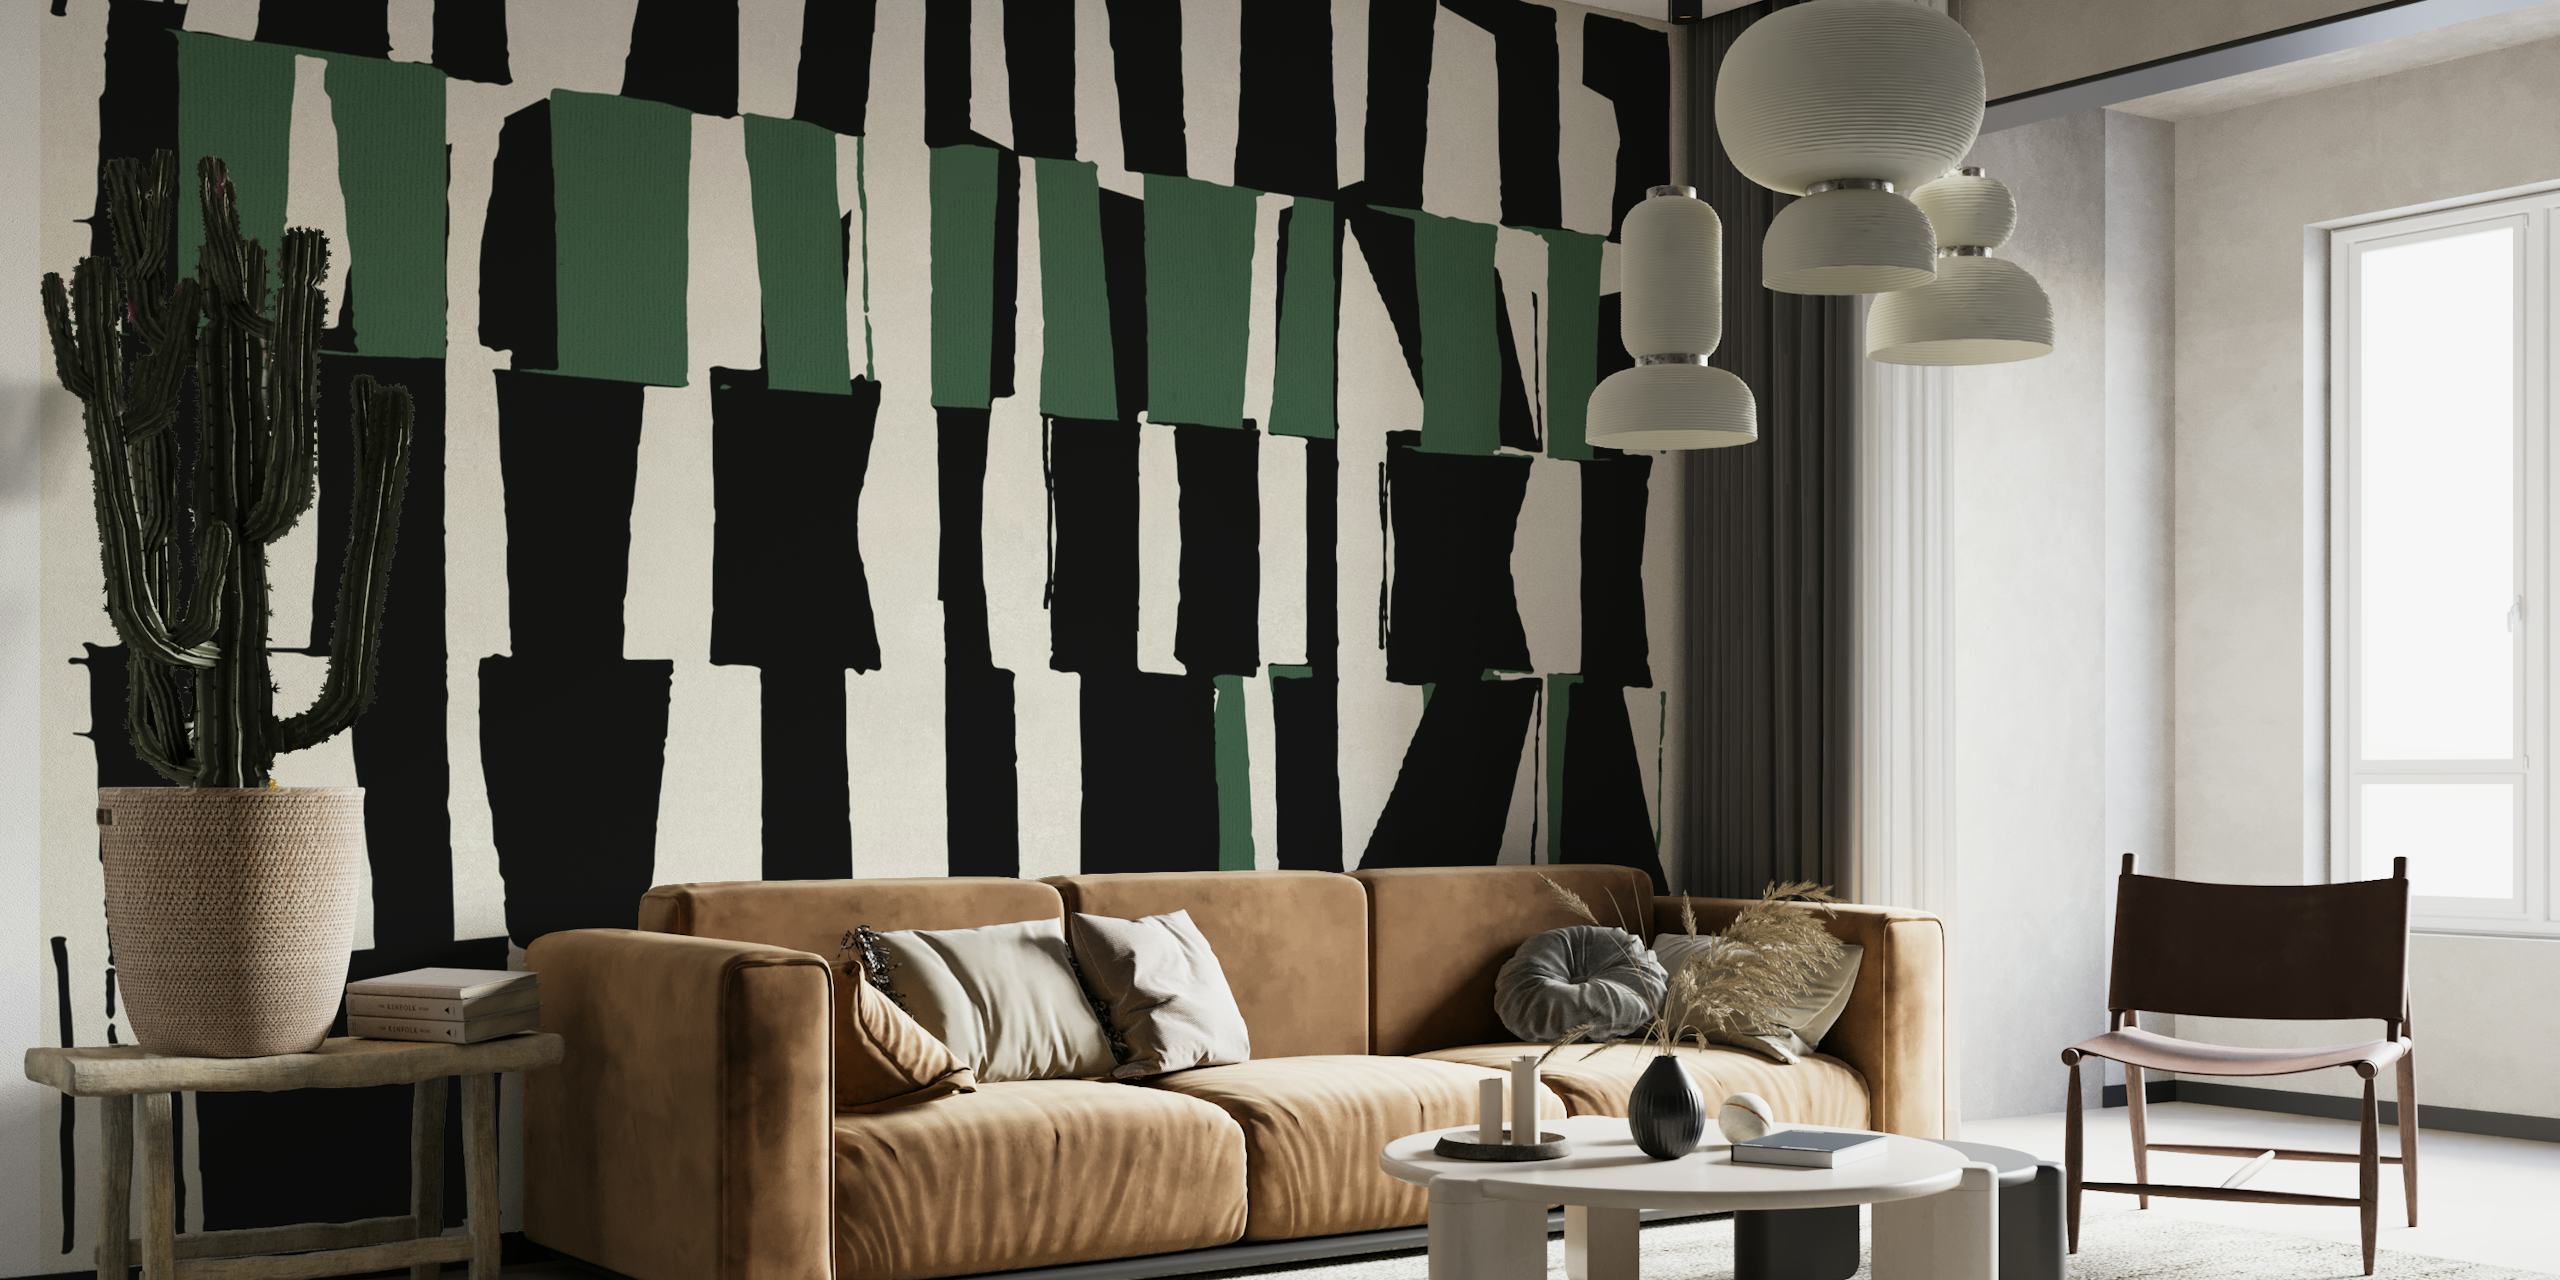 Modern Abstract Line 1 wall mural with black and green lines on a white background